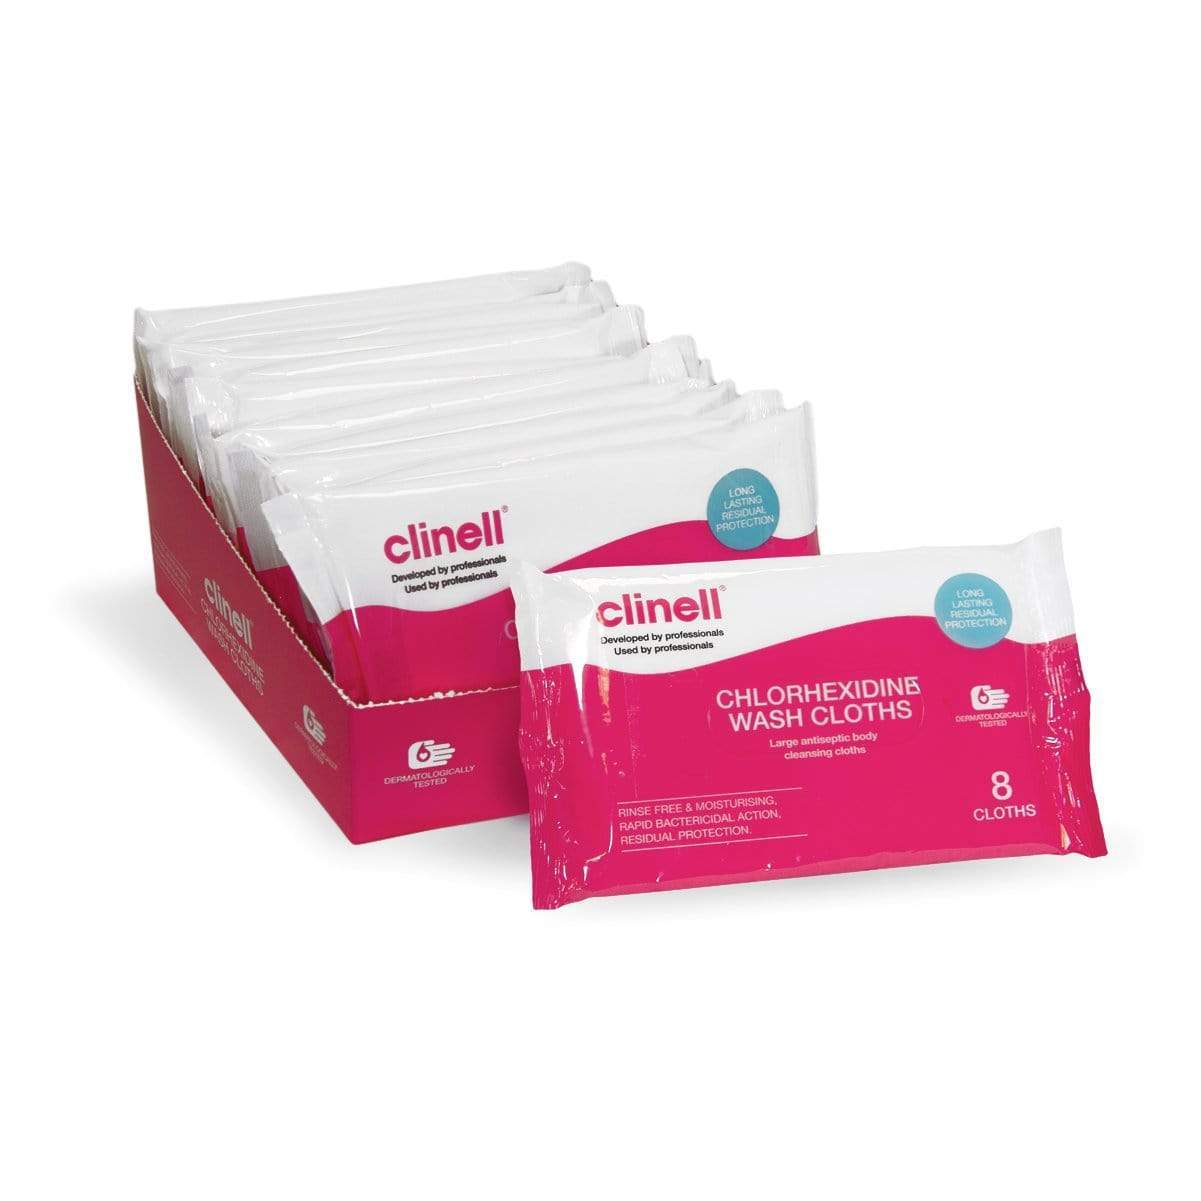 Clinell Body Wipes Clinell Chlorhexidine Wash Cloths